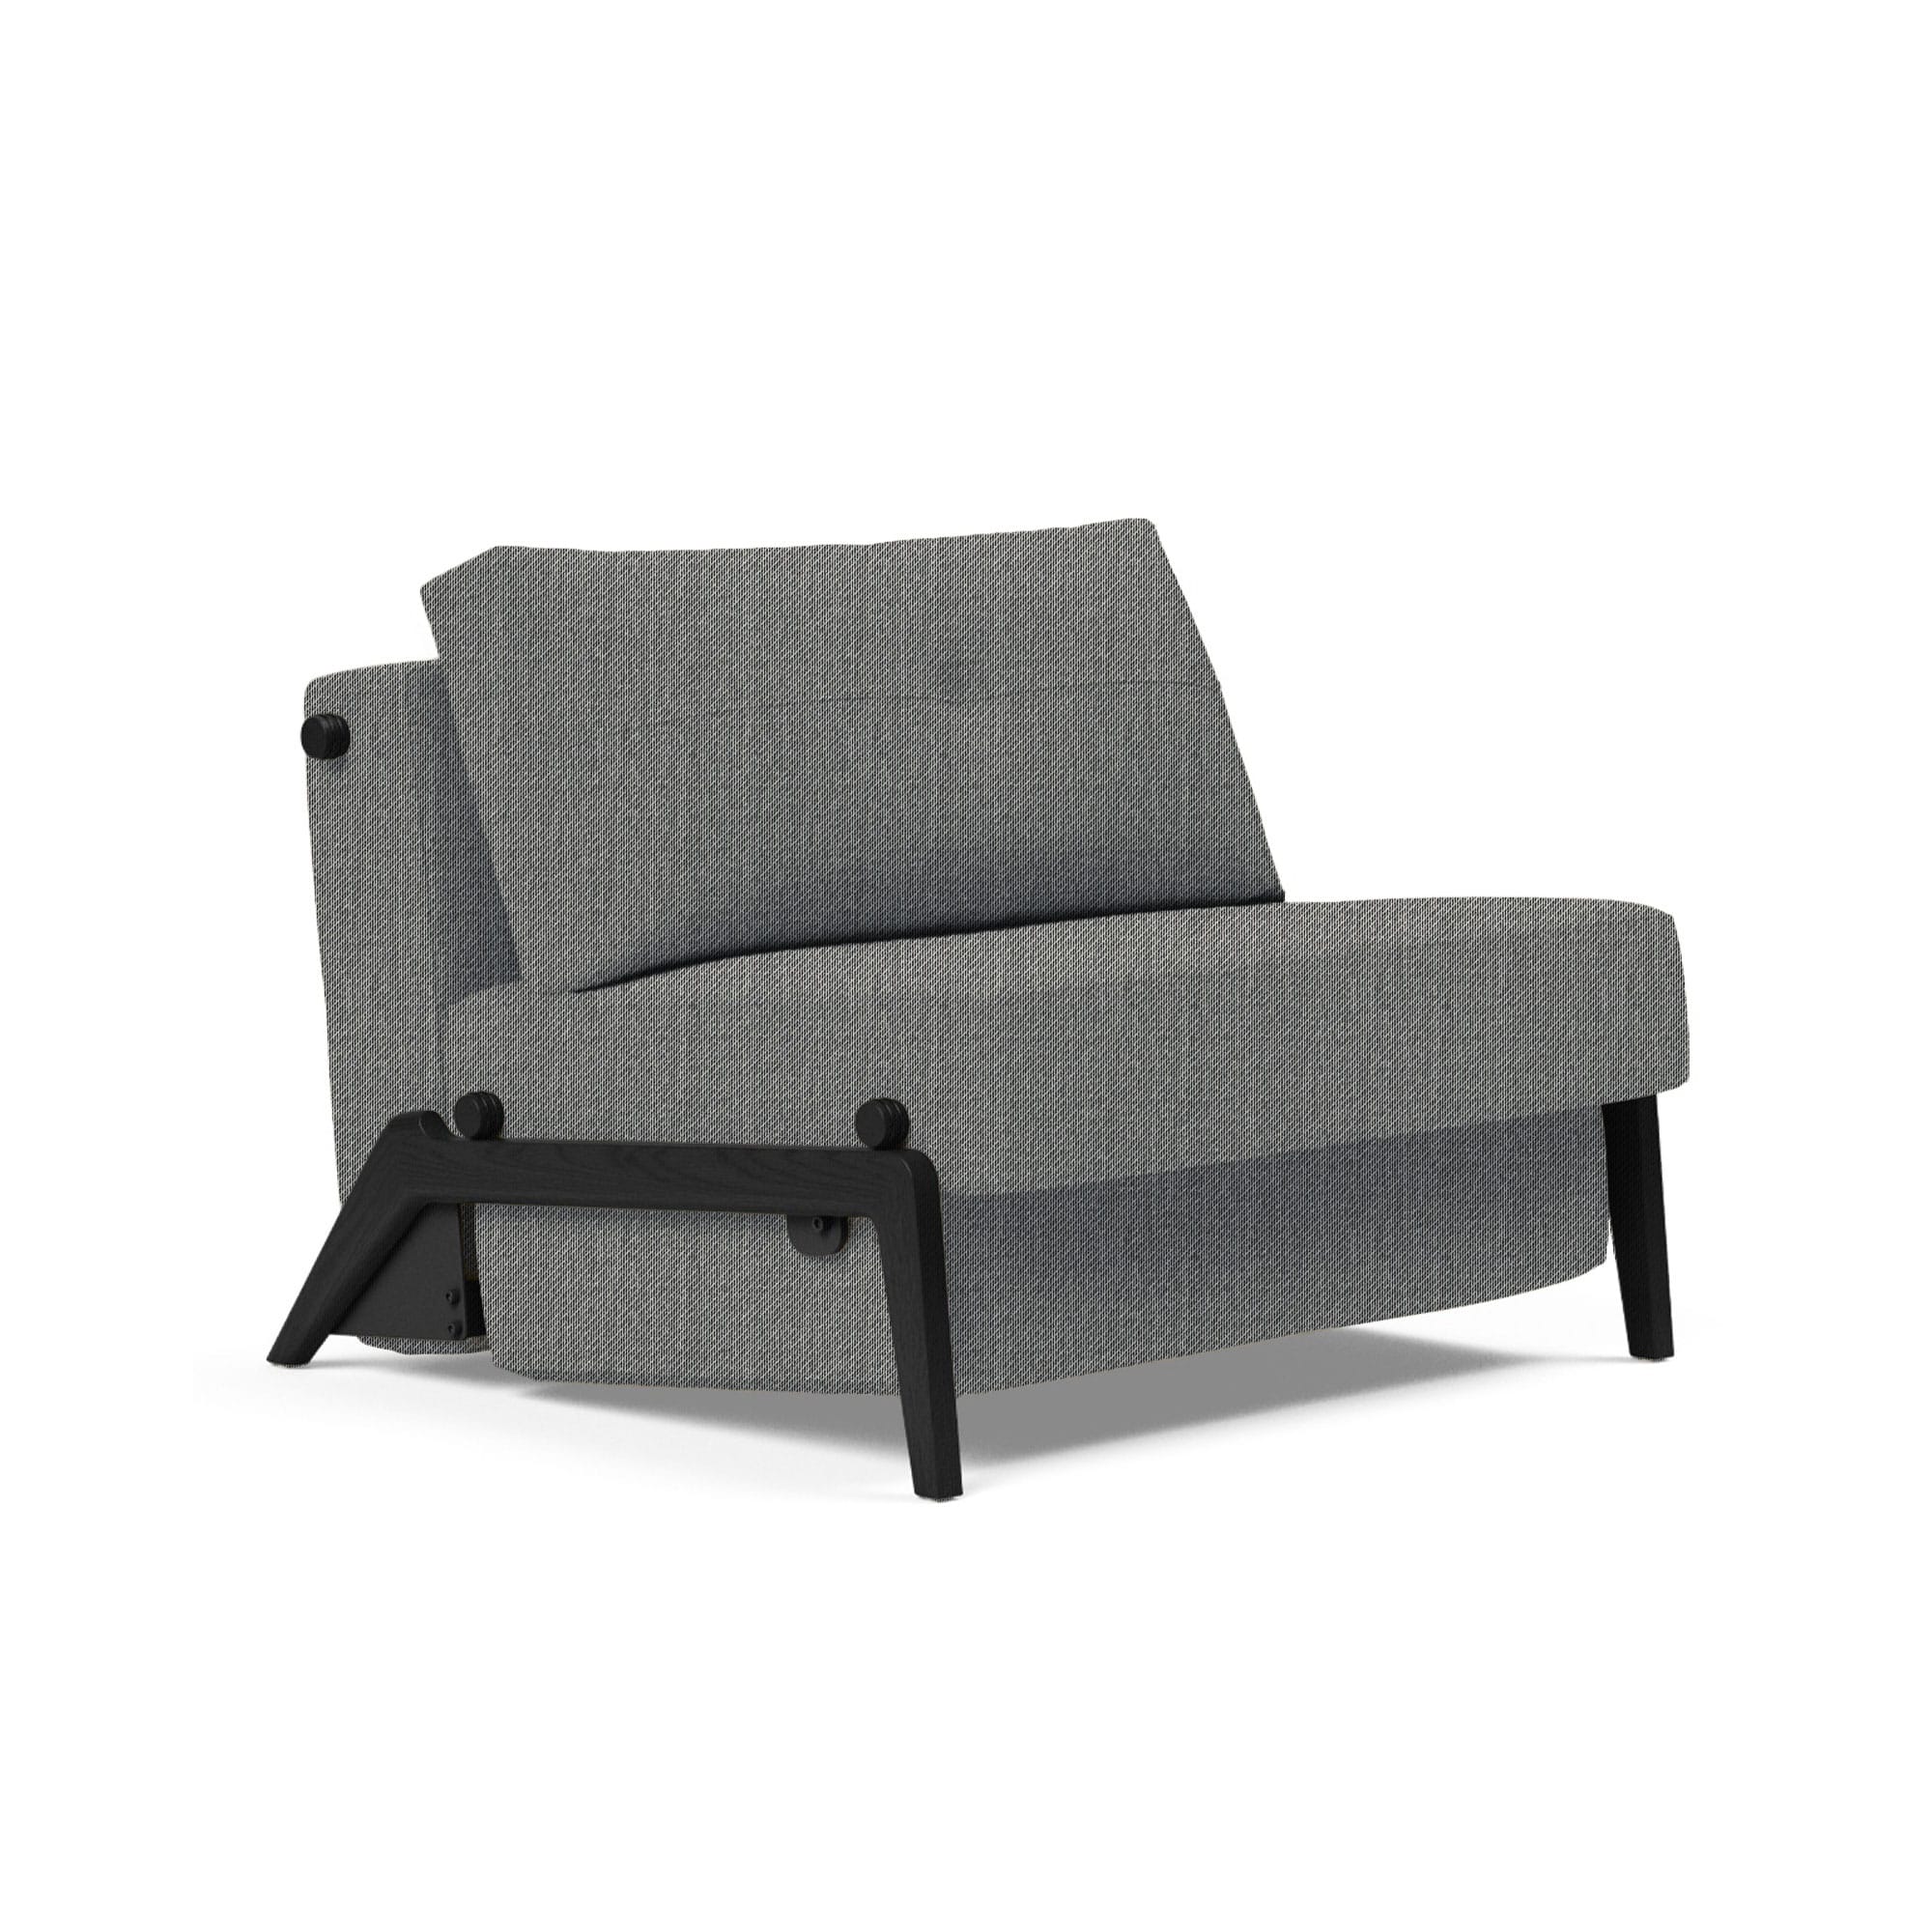 Flip Chair Bed Small Gray (Chicago 95) by Prestige